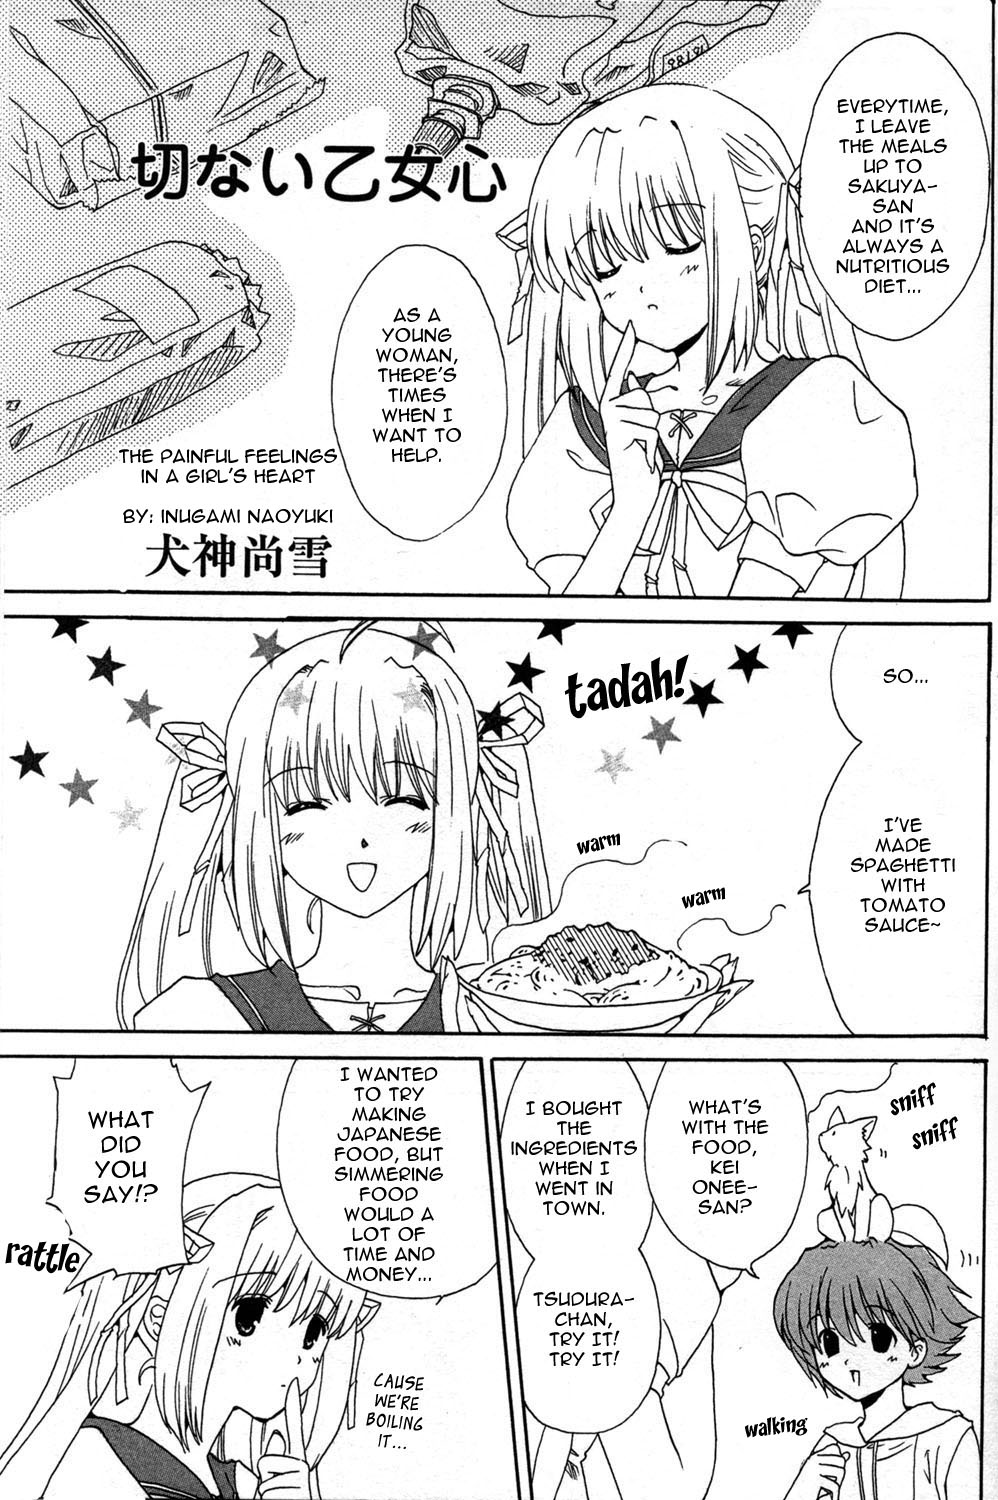 Akaiito Anthology Comic Vol. 1 Ch. 7 The Painful Feelings in a Girl's Heart (by Inugami Naoyuki)